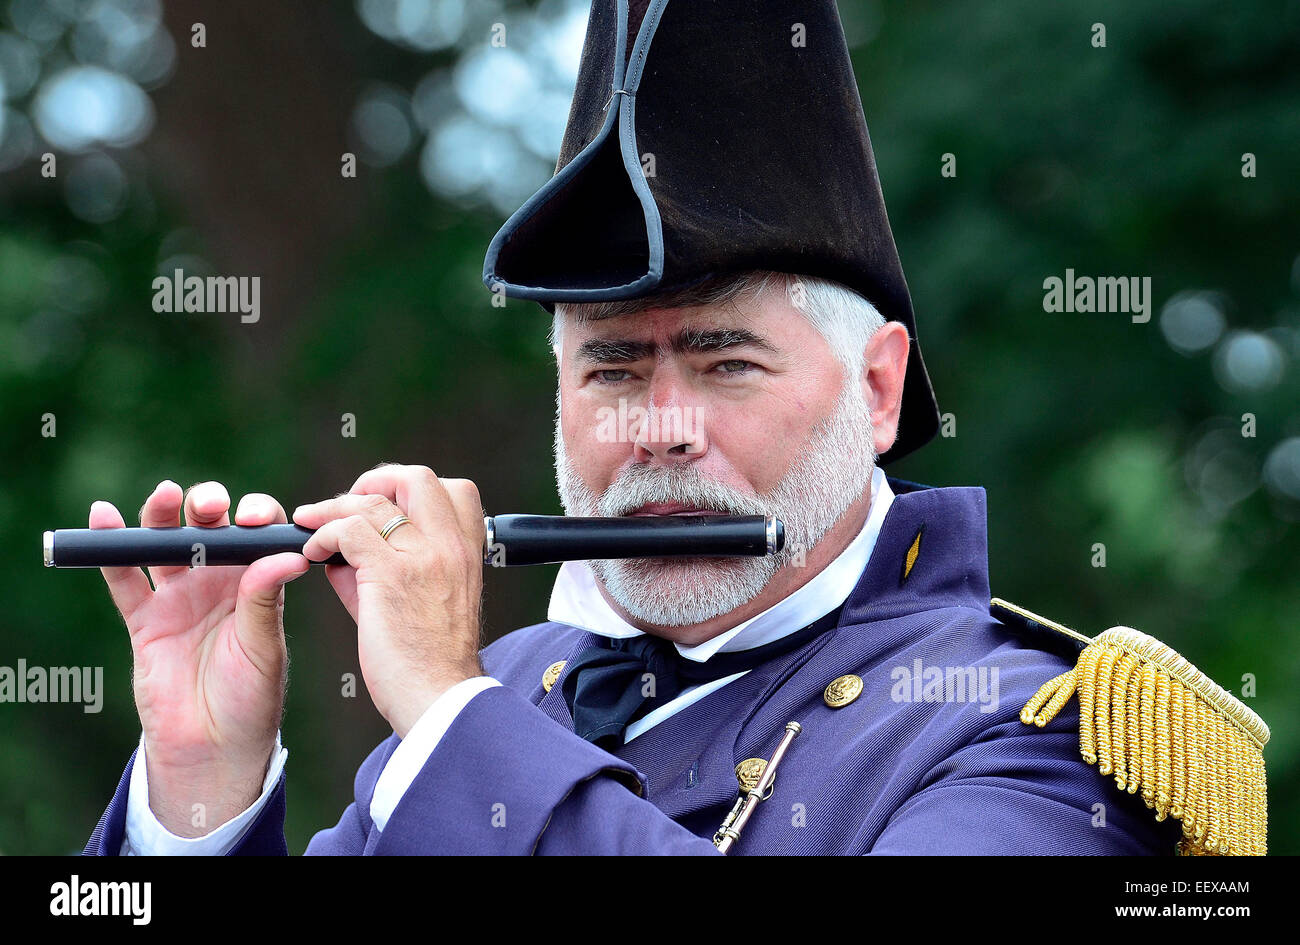 Bob Miorelli of the 'Sailing Masters of 1812' fire and drum corps plays the fife during a performance at the Clinton town 350th anniversary festival. CT USA Stock Photo